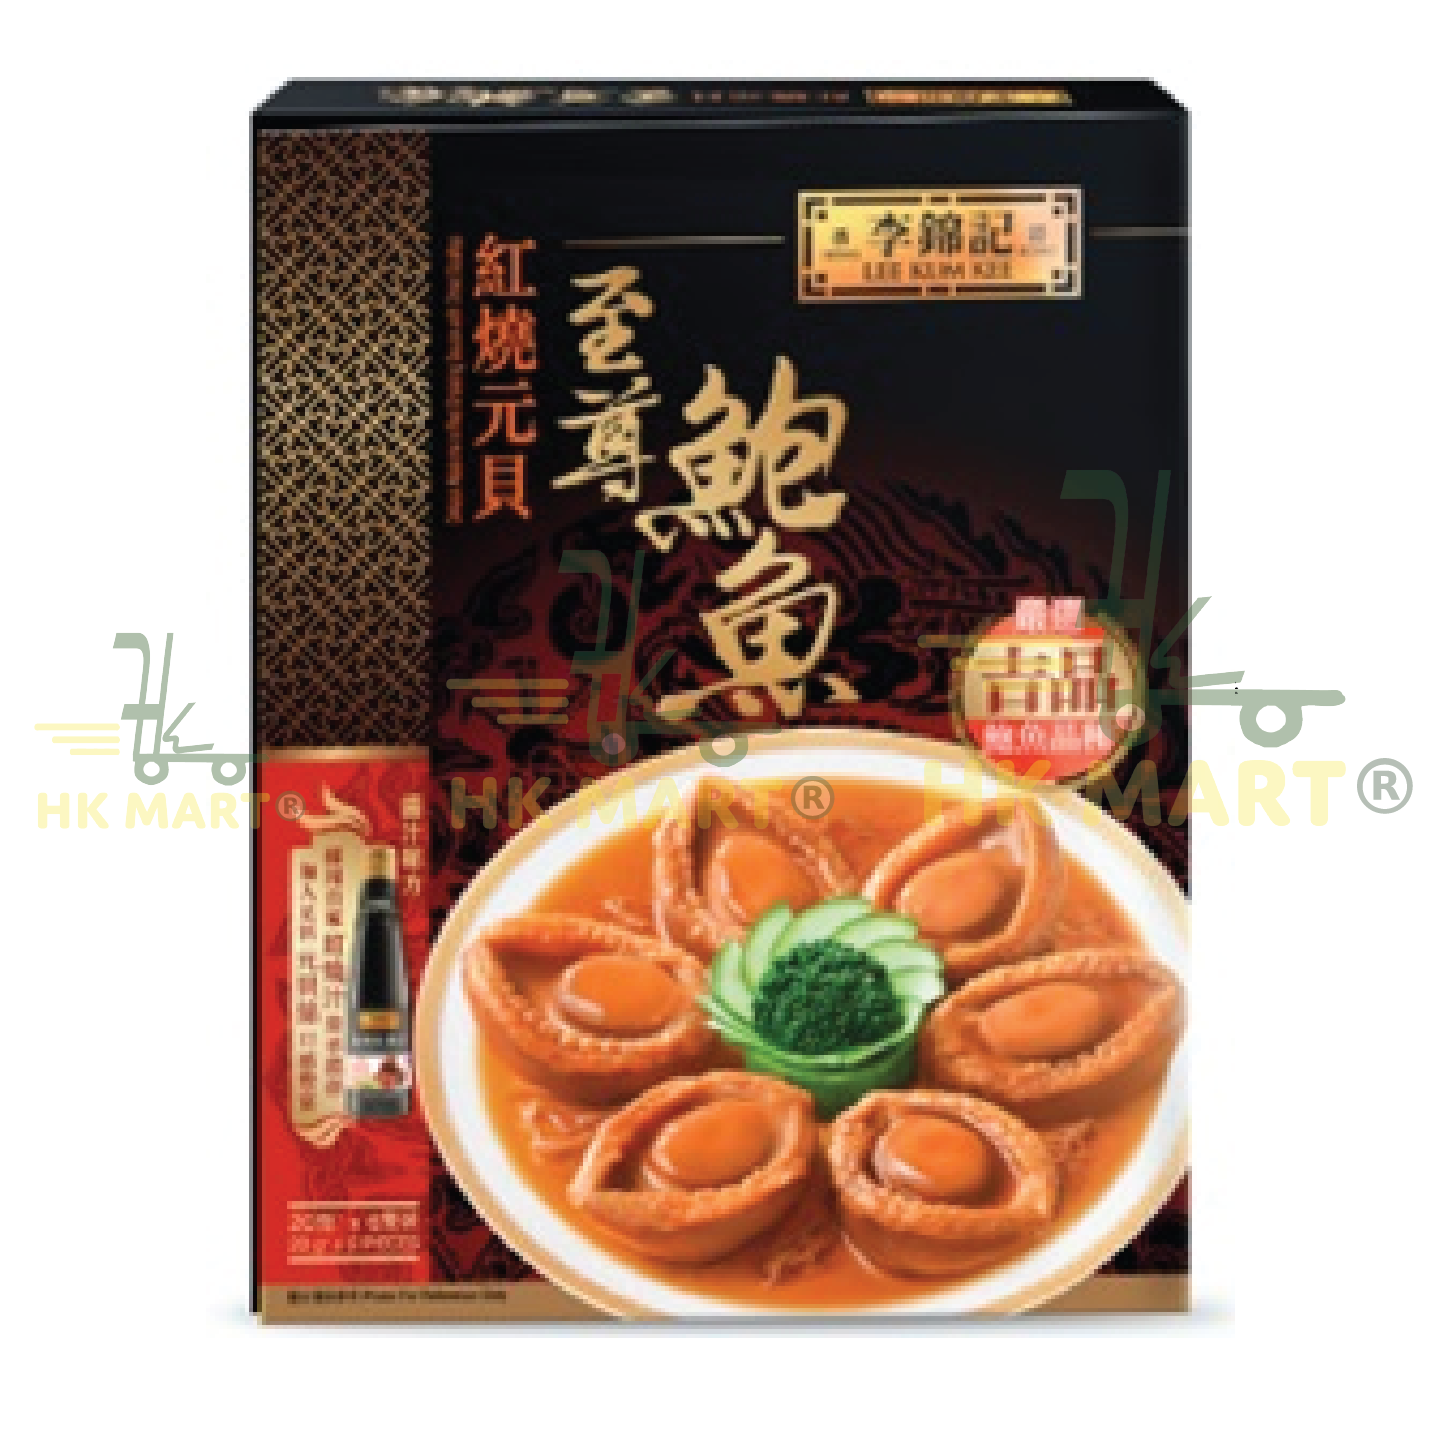 LEE KUM KEE DELUXE ABALONE IN RED BRAISING SAUCE WITH DRIED SCALLOP 6PCS 560G 李錦記 紅燒元貝至尊鮑魚 6隻 560克